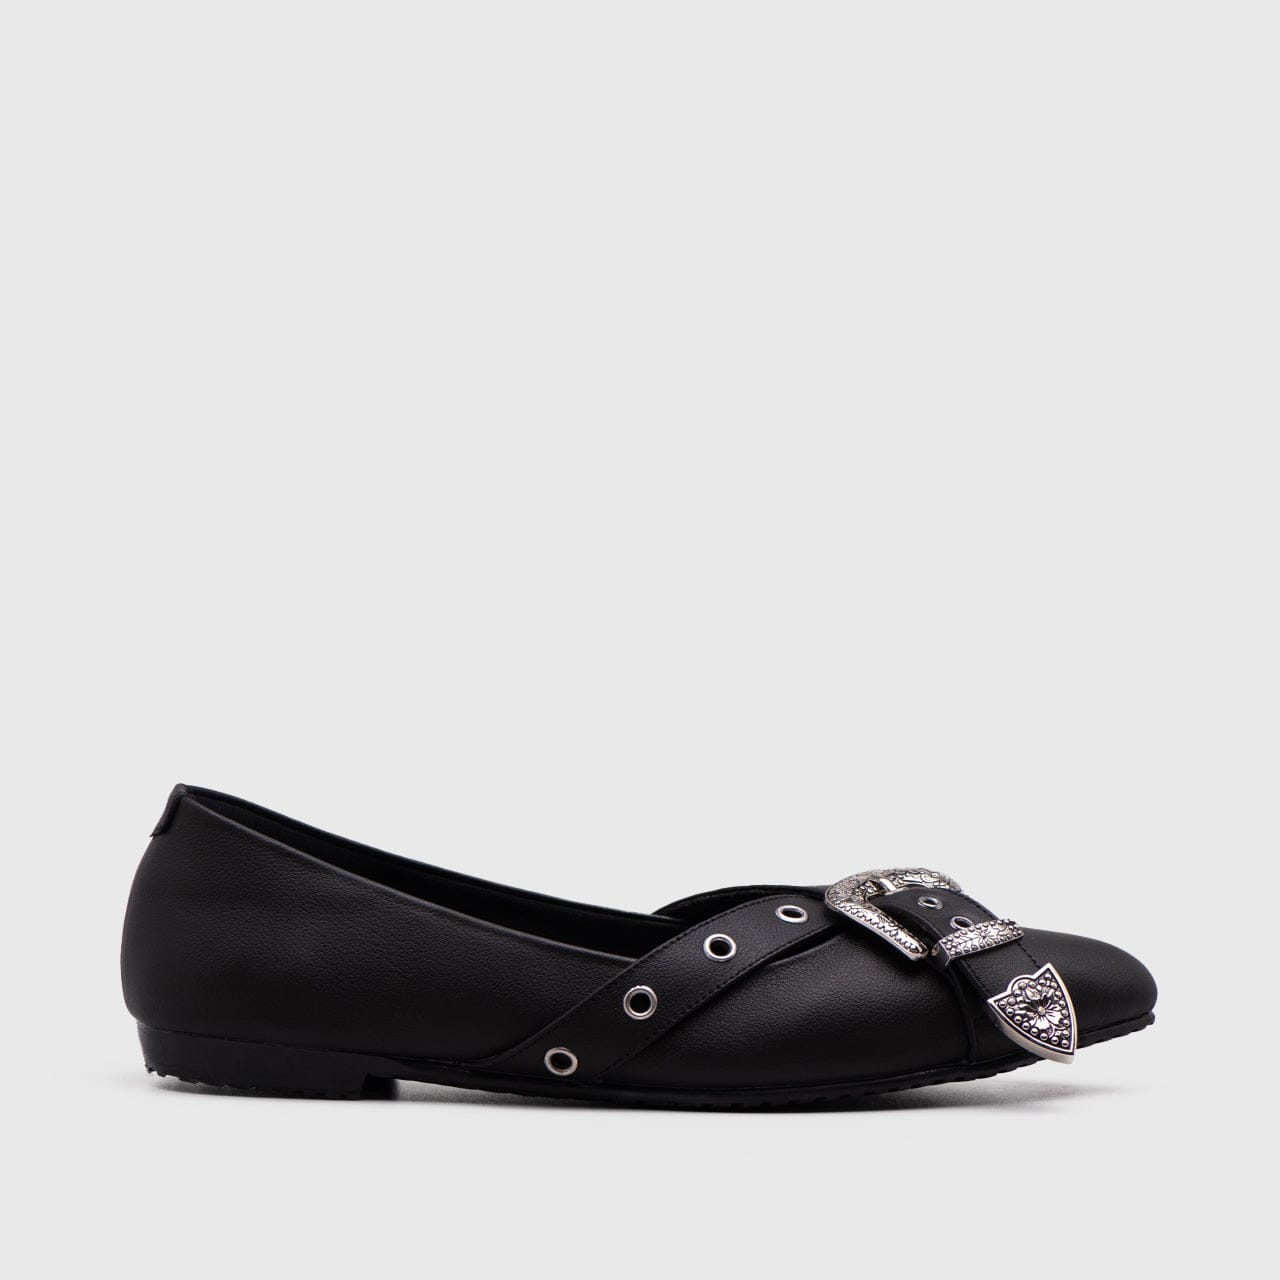 Adorable Projects Official Flat shoes Mufla Flat Shoes Black